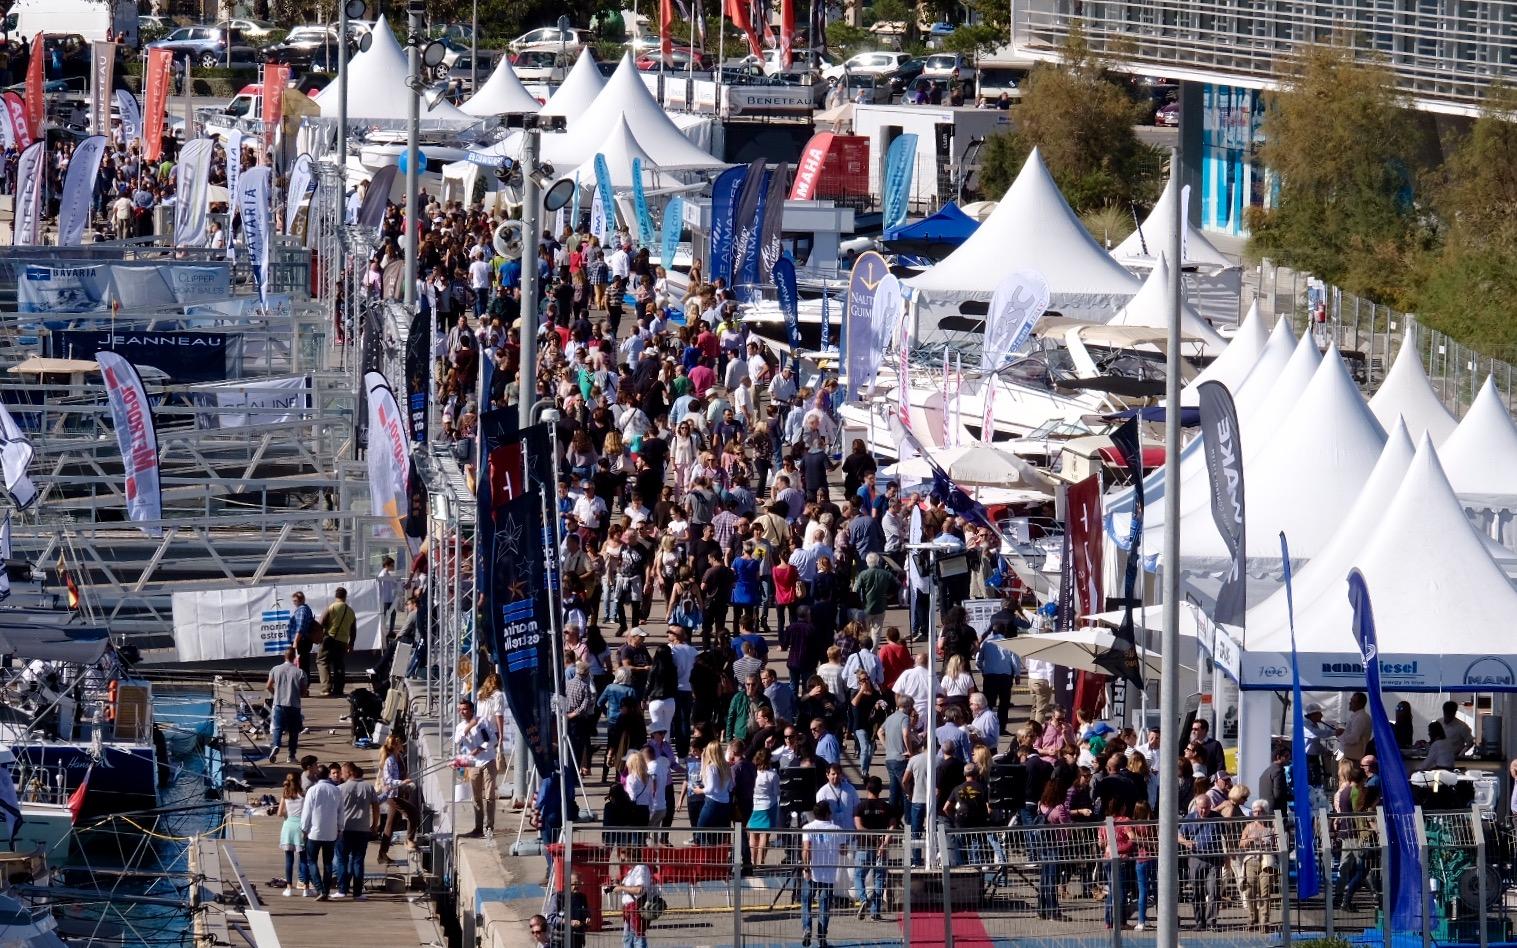 The Valencia Boat Show received a total of 14,728 visitors in the five days it was held